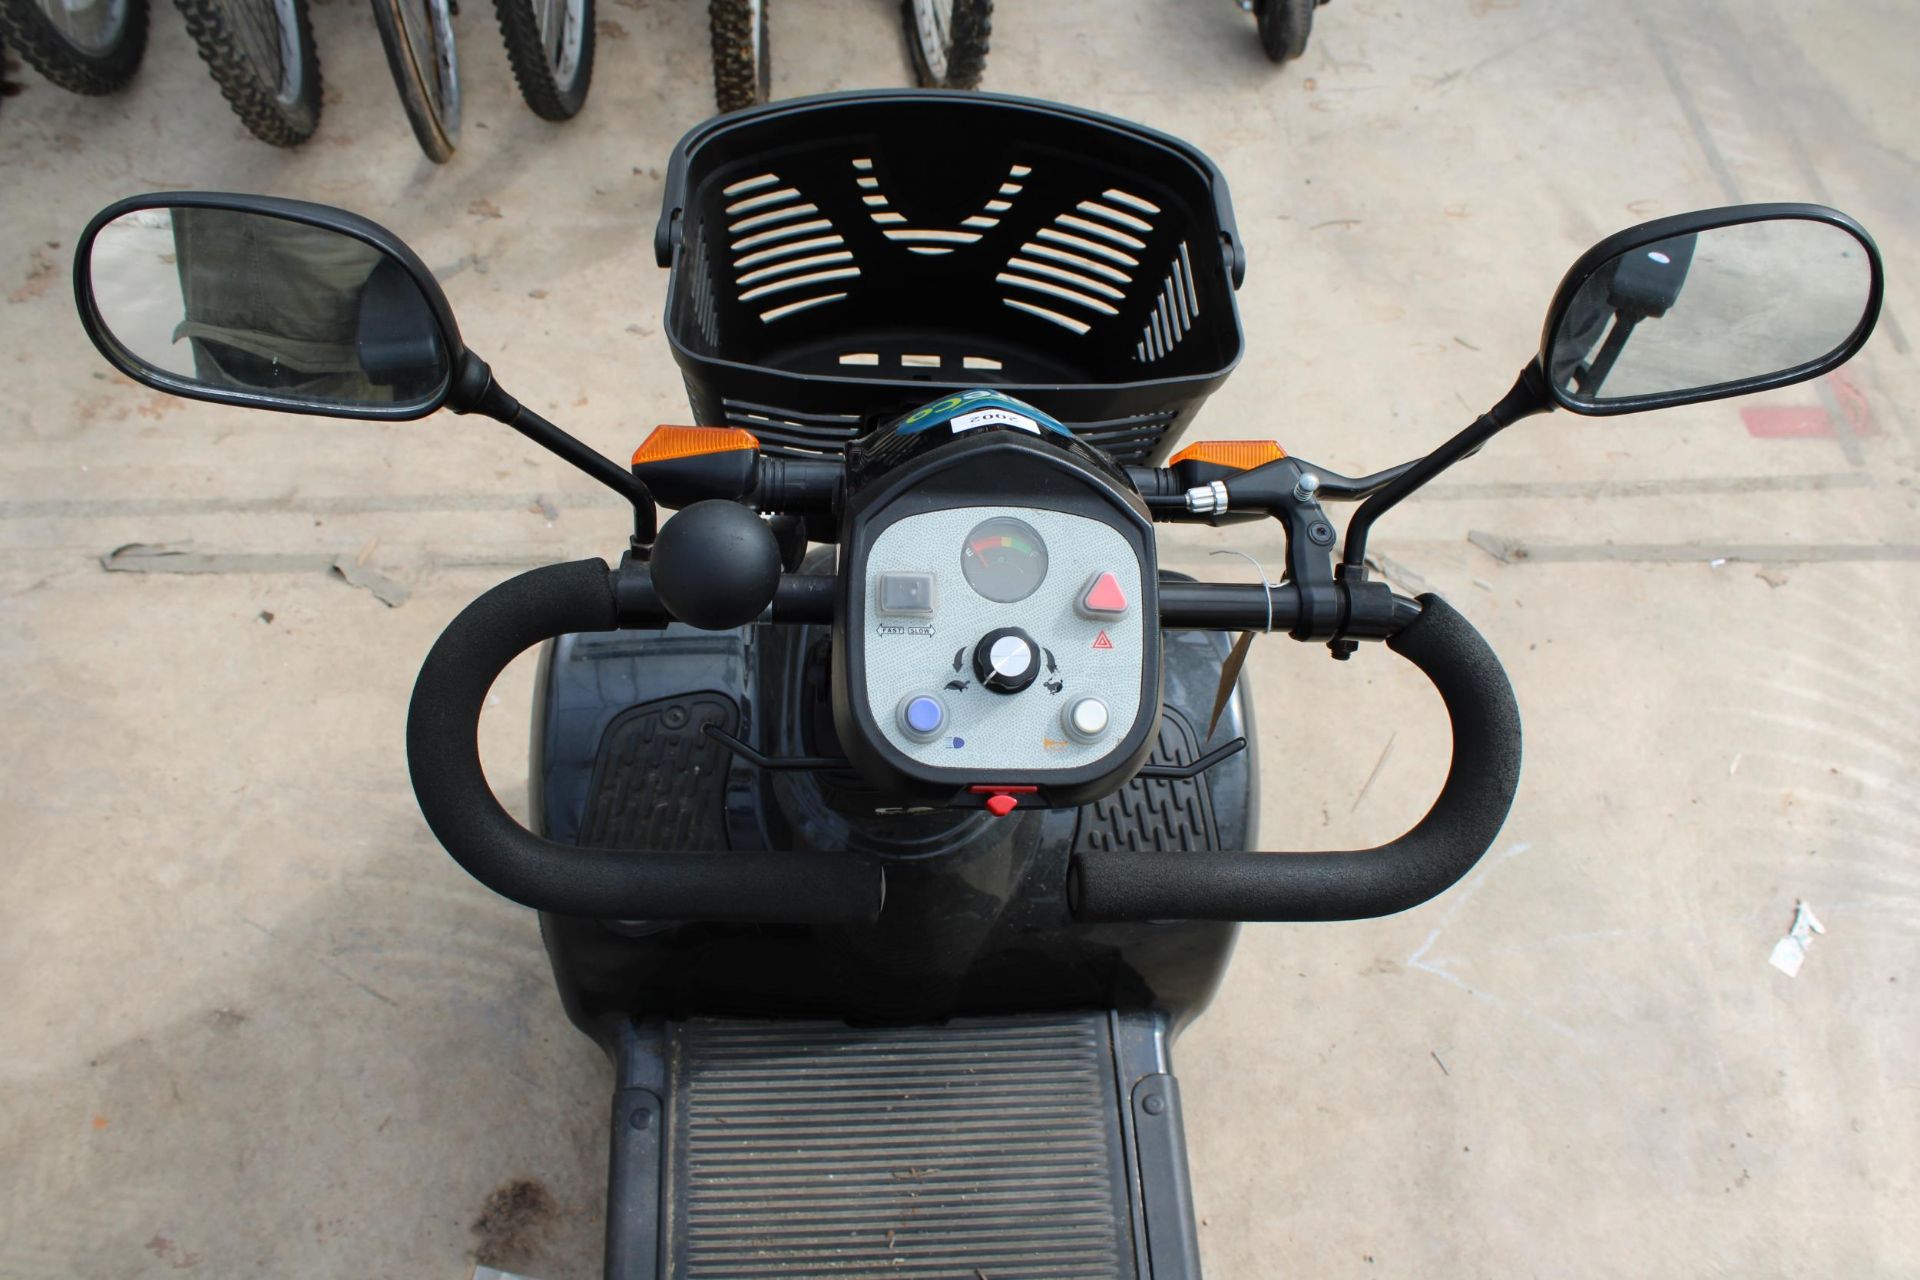 A FOUR WHEEL CARE CO ELECTRIC MOBILITY SCOOTER COMPLETE WITH CHARGER - Image 5 of 7